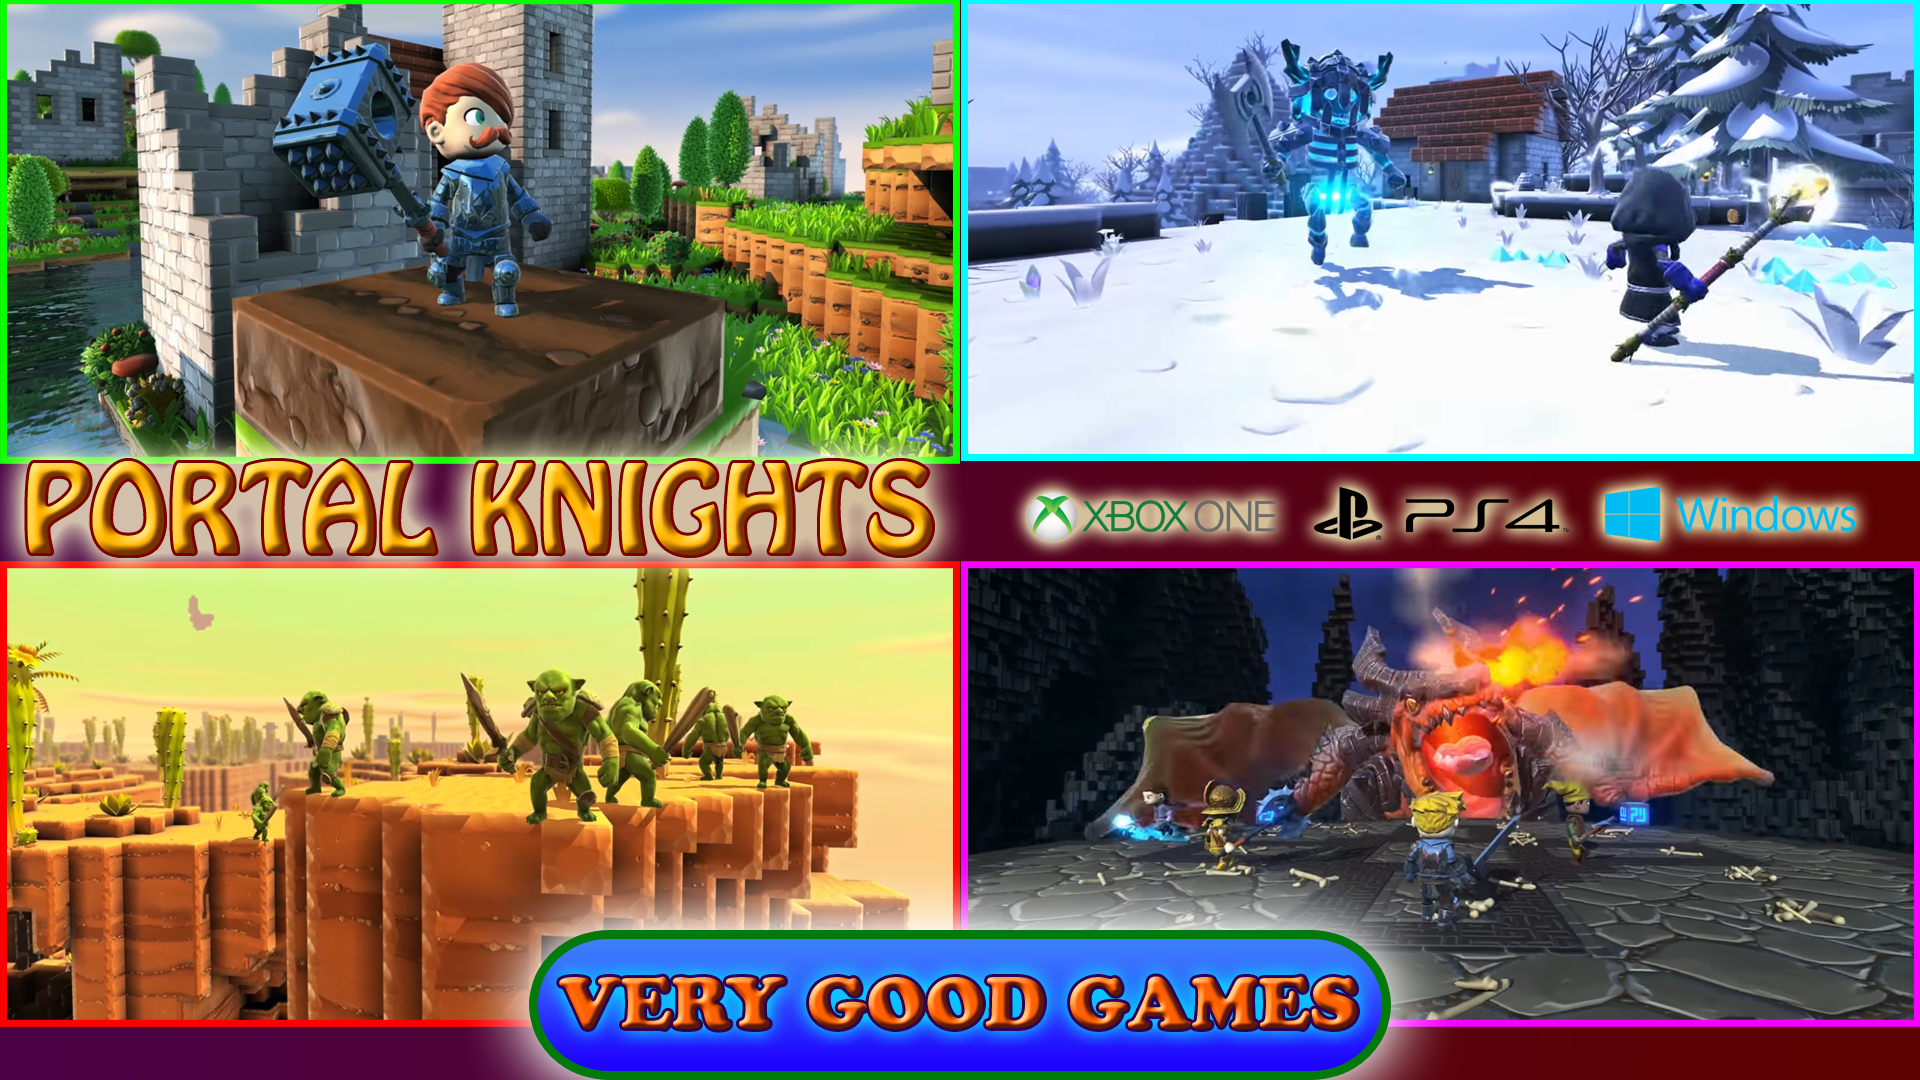 Portal Knights - an adventure game with the Minecraft style for PlayStation 4 and Xbox One game consoles, for Windows laptops and desktops